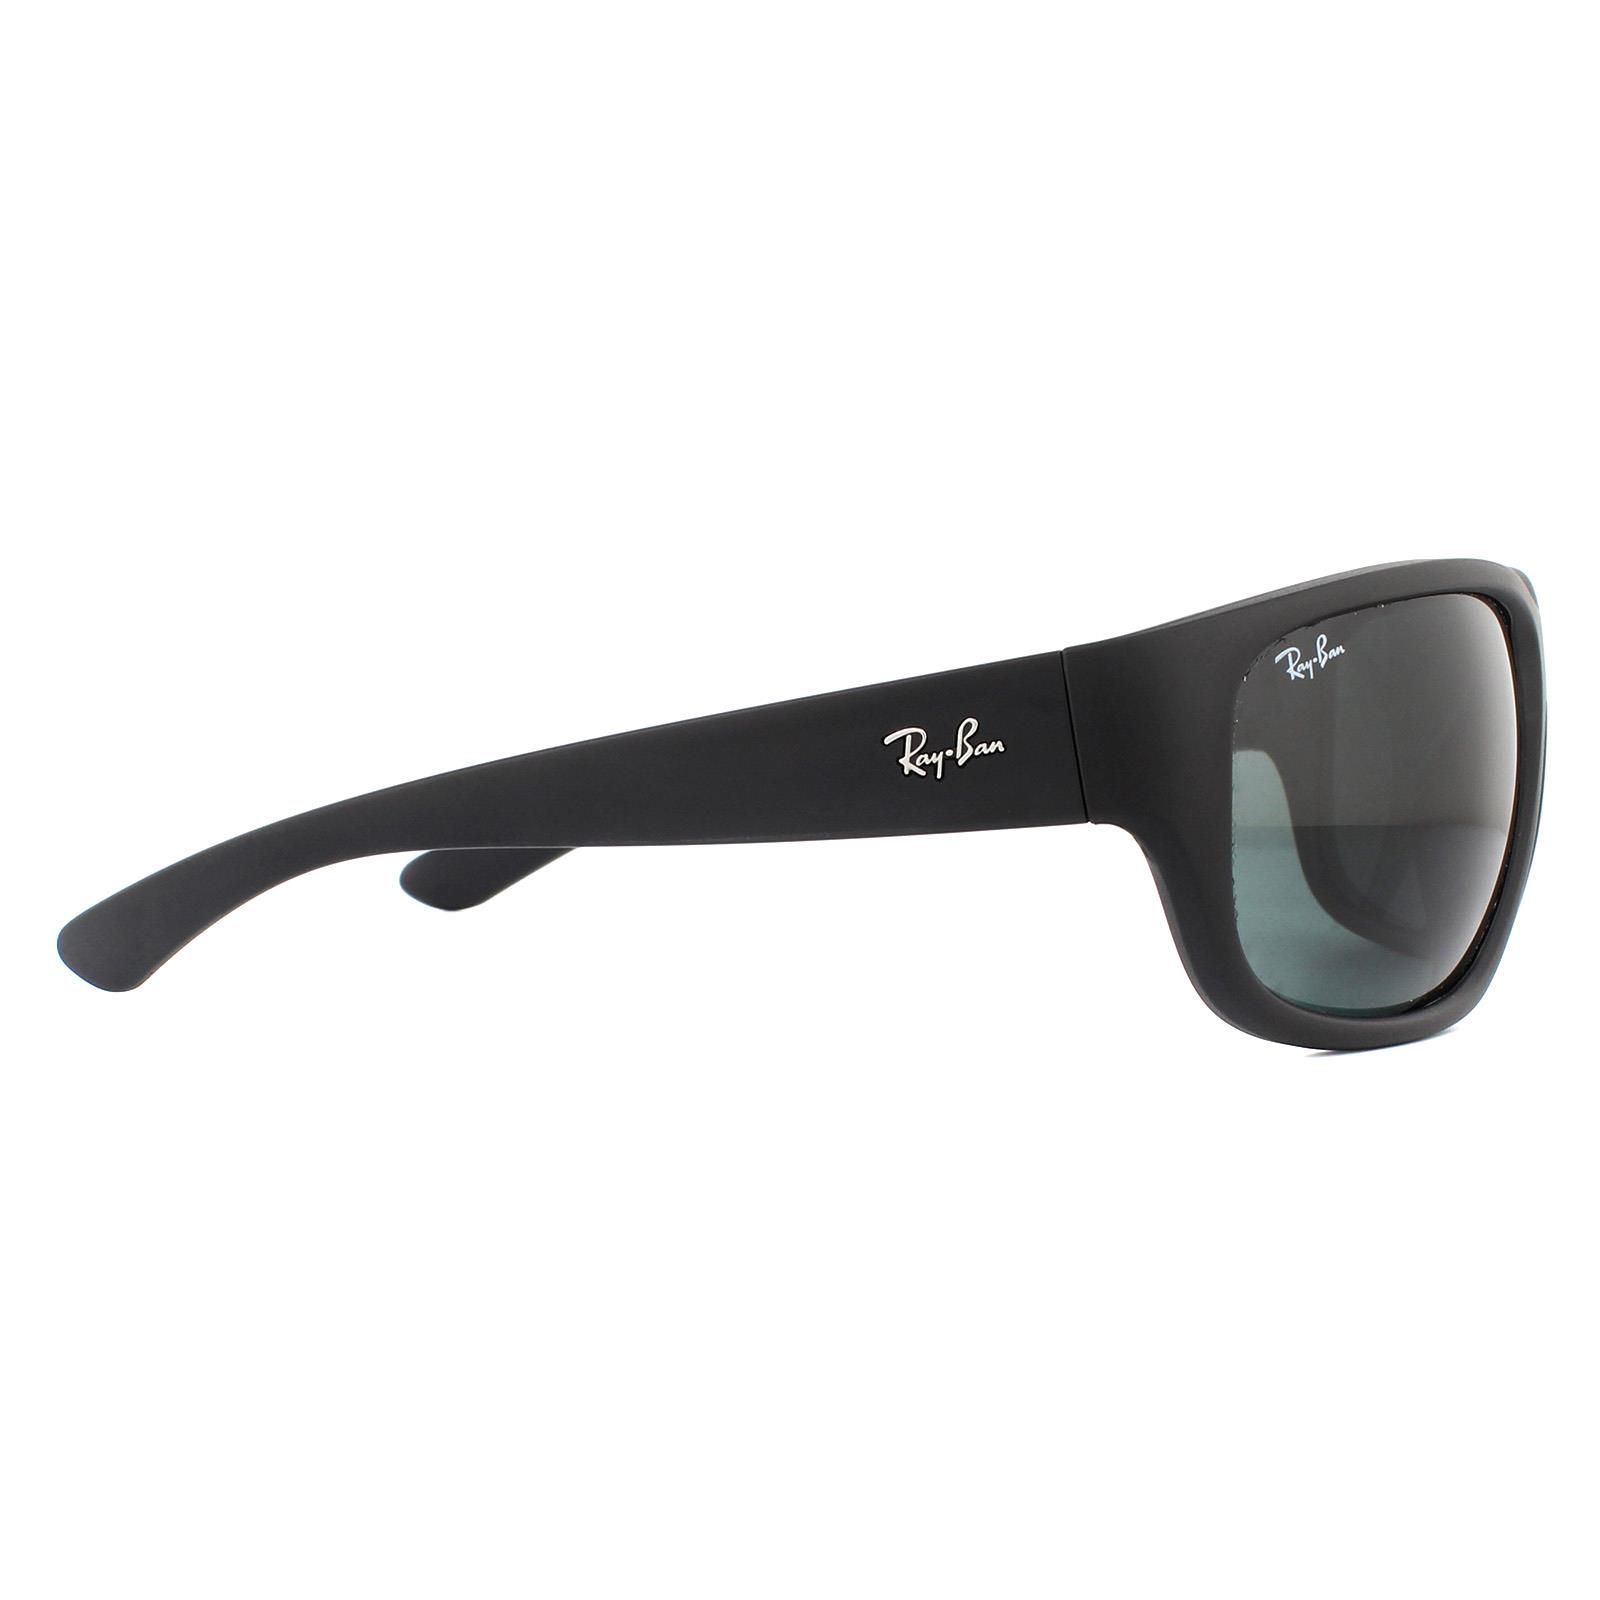 Ray-Ban Sunglasses 4300 601SR5 Black Blue Grey Classic has a large wrap around frame with a bold profile. The nylon frame is super lightweight and comfortable and the large lenses will guarantee maximum protection and vision. The Ray-Ban logo embellishes the temples and the RB etching on the lens ensures authenticity.